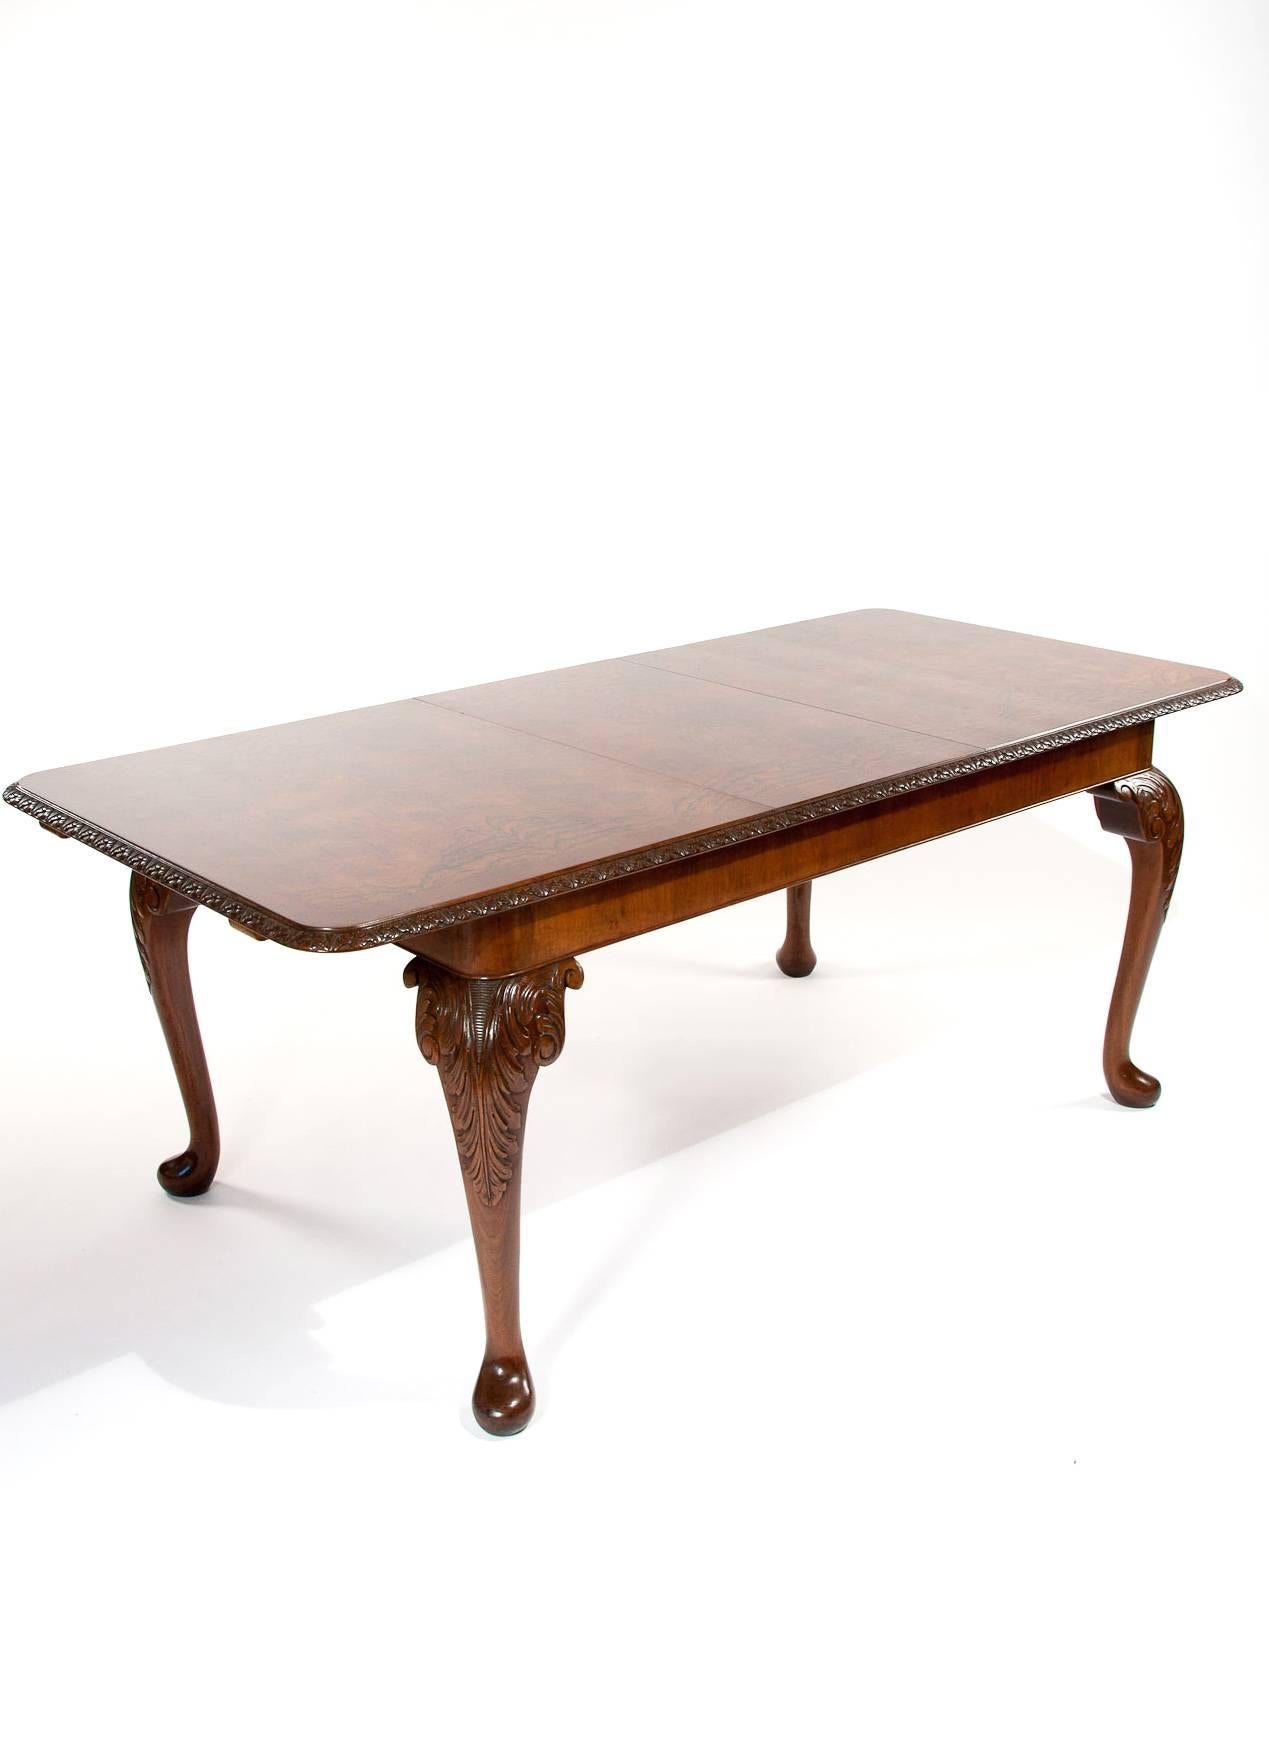 A quality antique burr walnut extending dining table with extra leaf standing on cabriole legs.
This quality antique Queen Anne style dining table dating to the 1920s has a rectangle burr walnut quarter bookmatch veneered top with a crossbanded